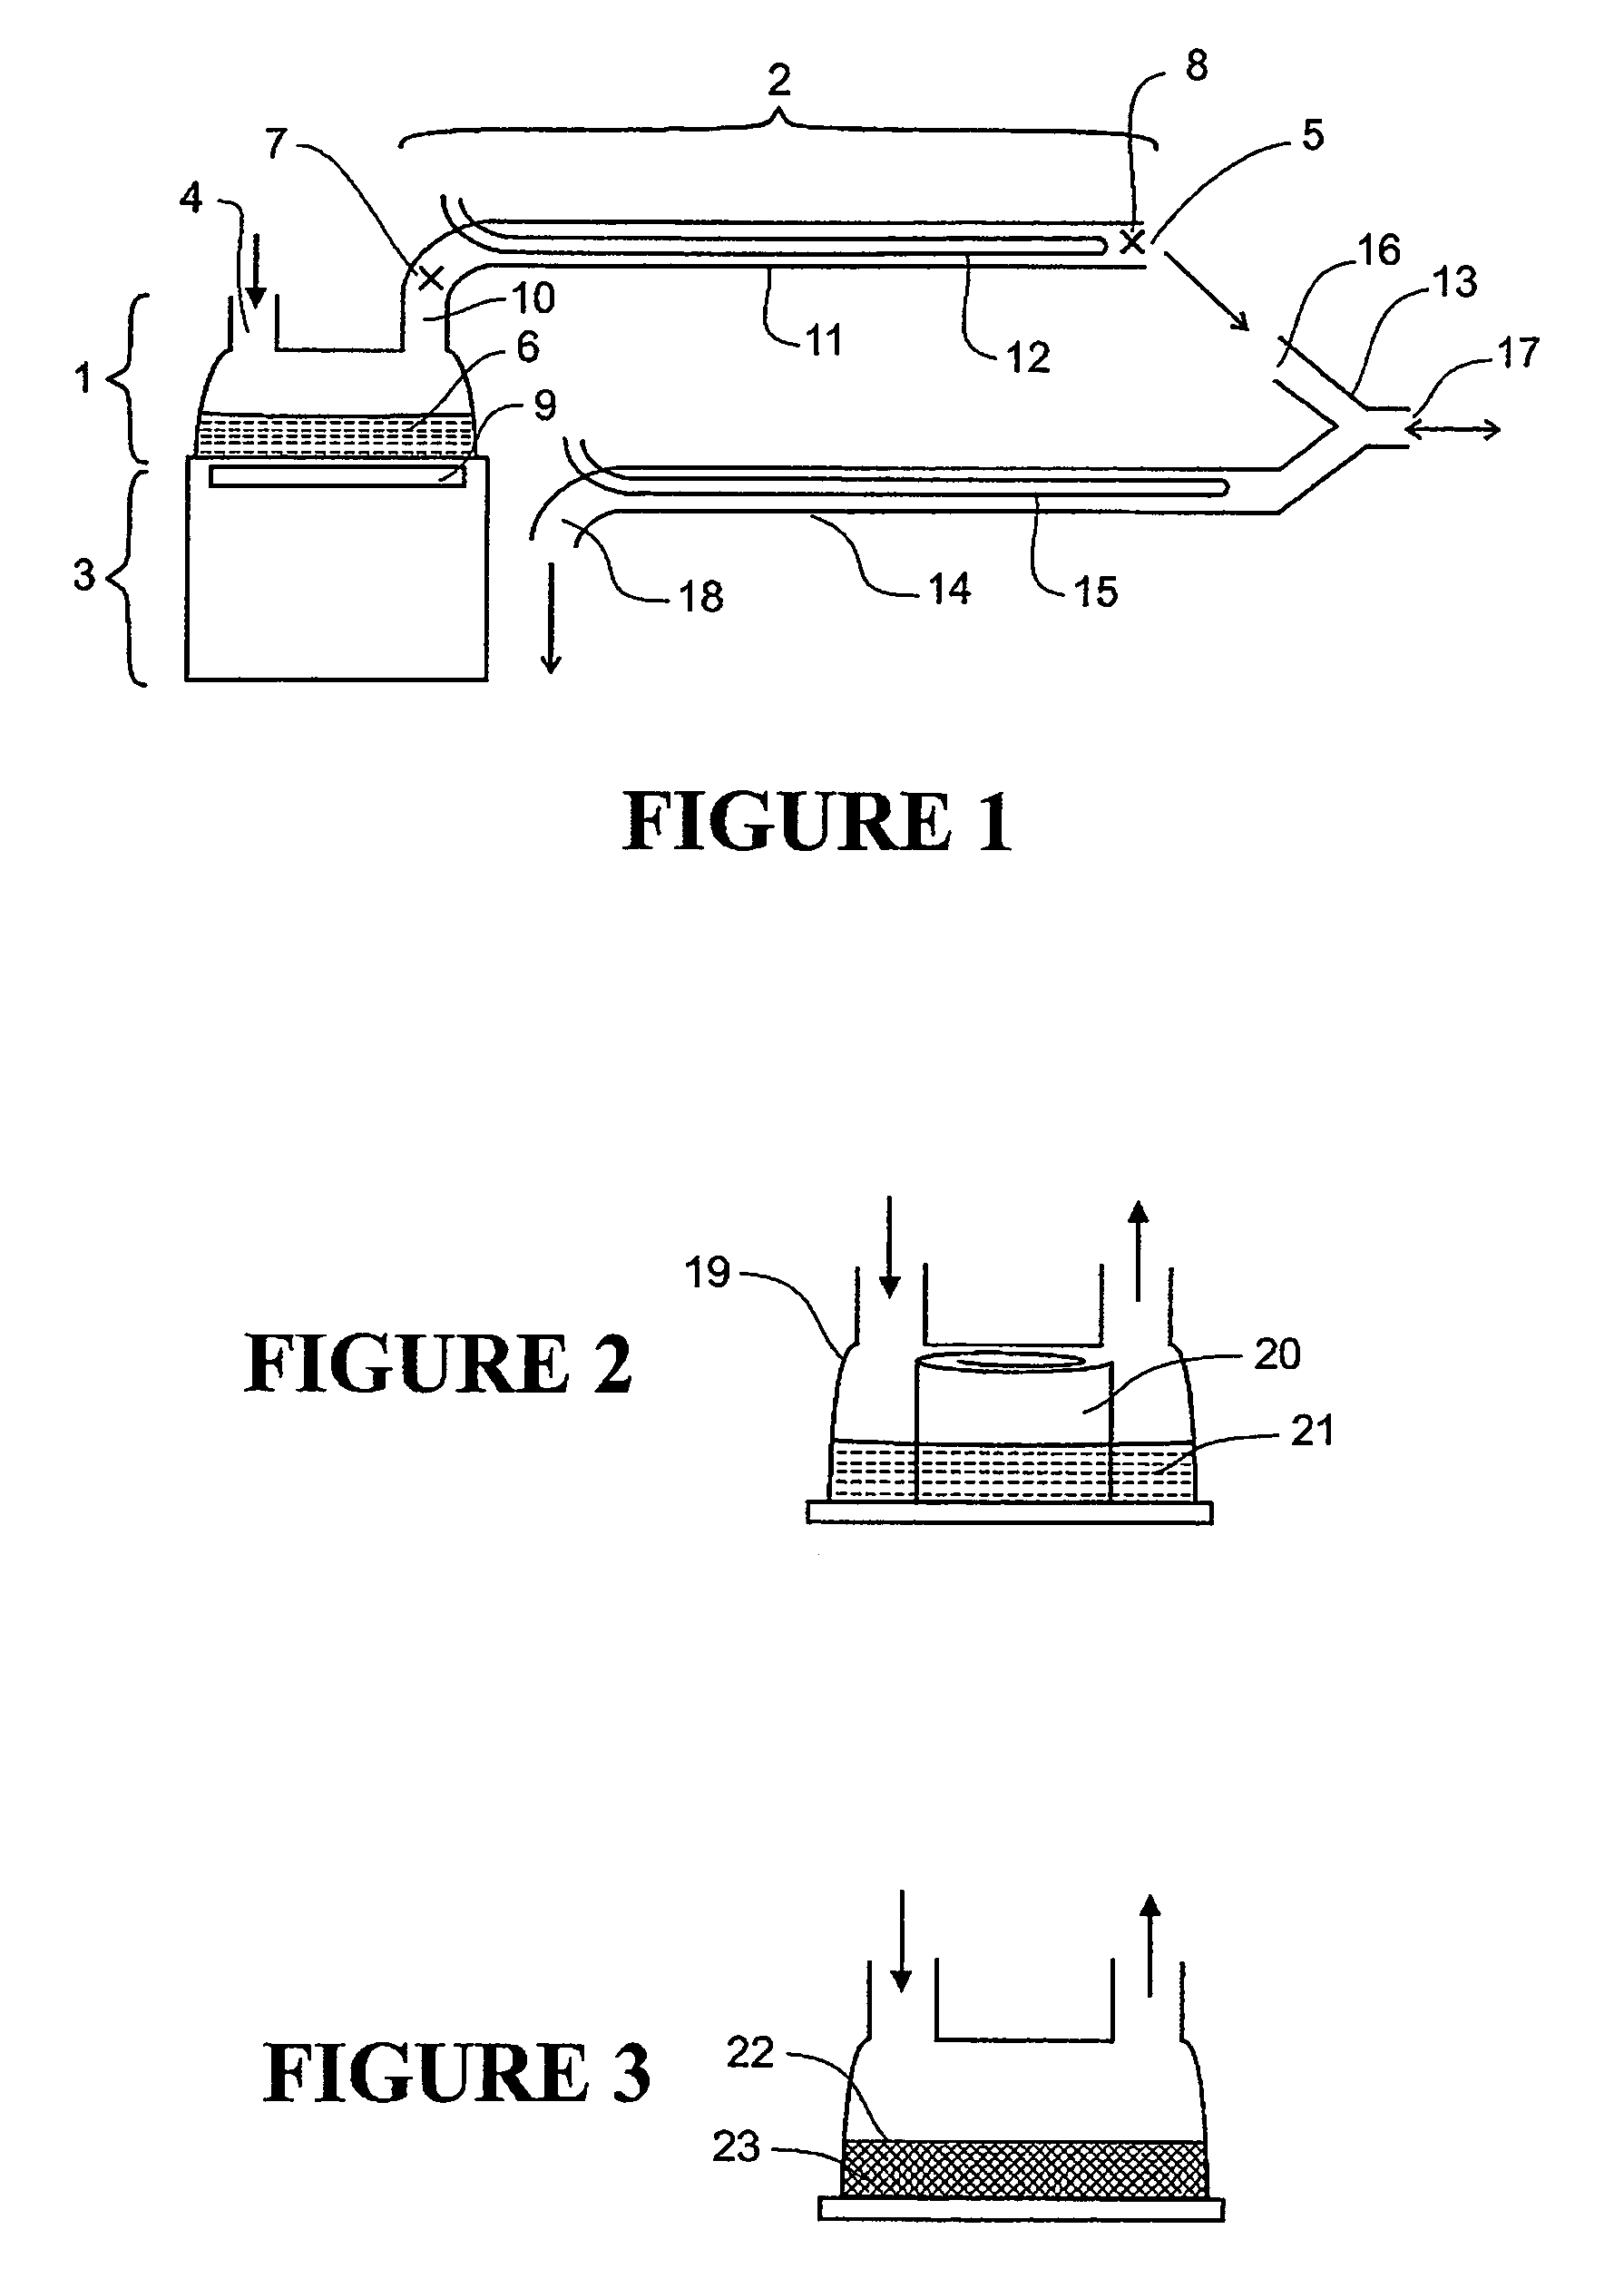 Humidifier with parallel gas flow paths